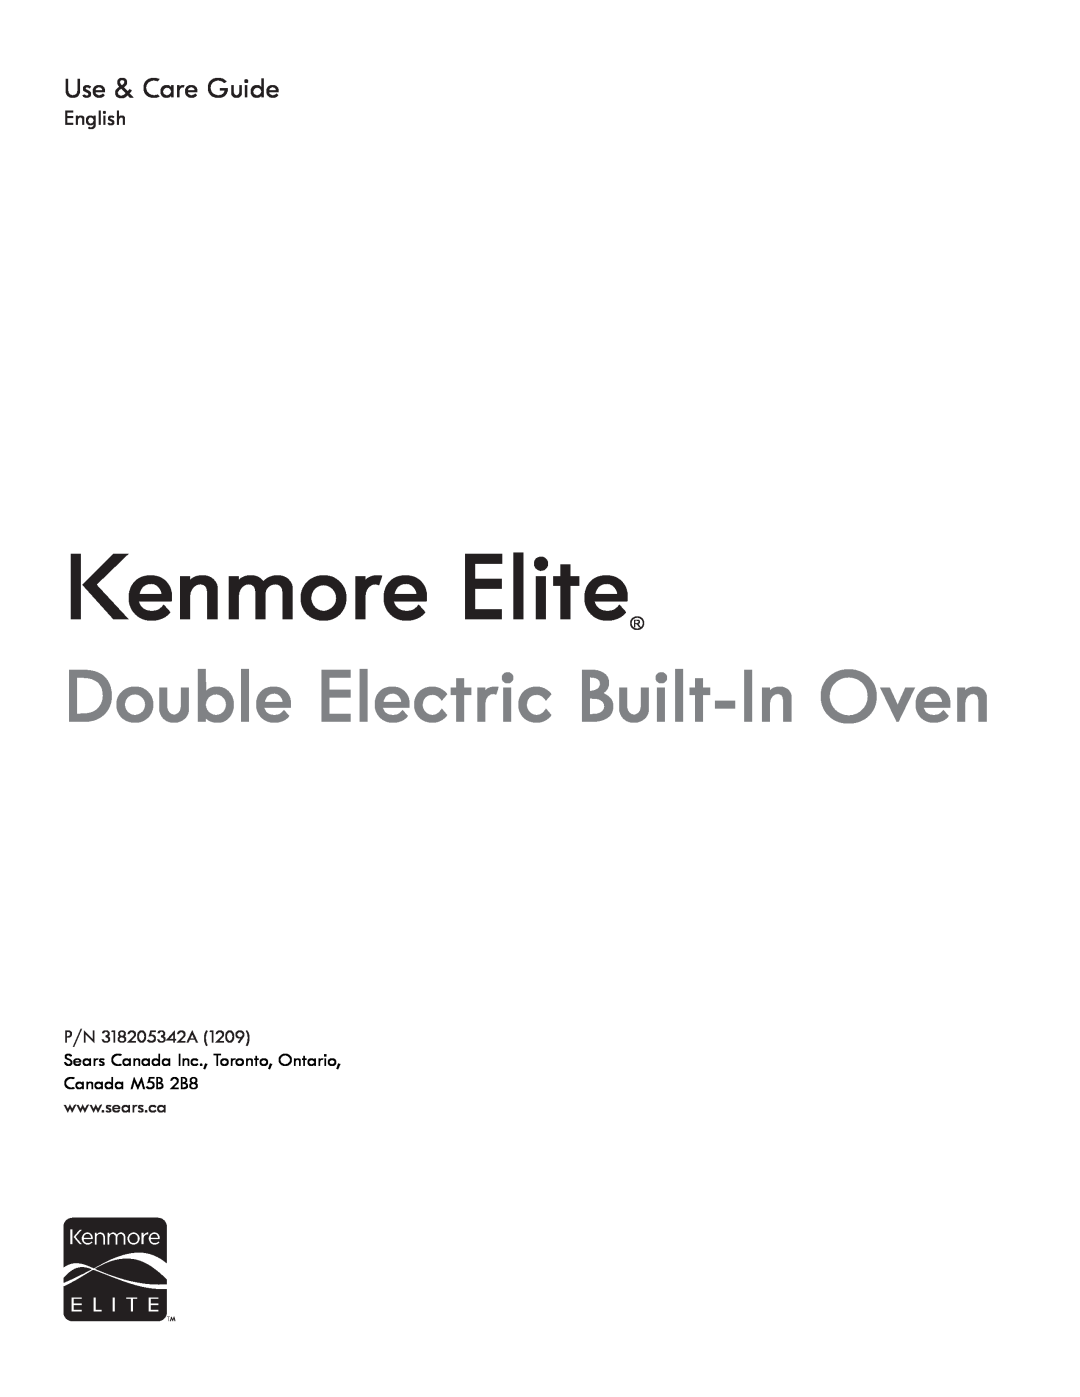 Kenmore 318205342A manual Kenmore Elite, Double Electric Built-In Oven, Use & Care Guide, English 